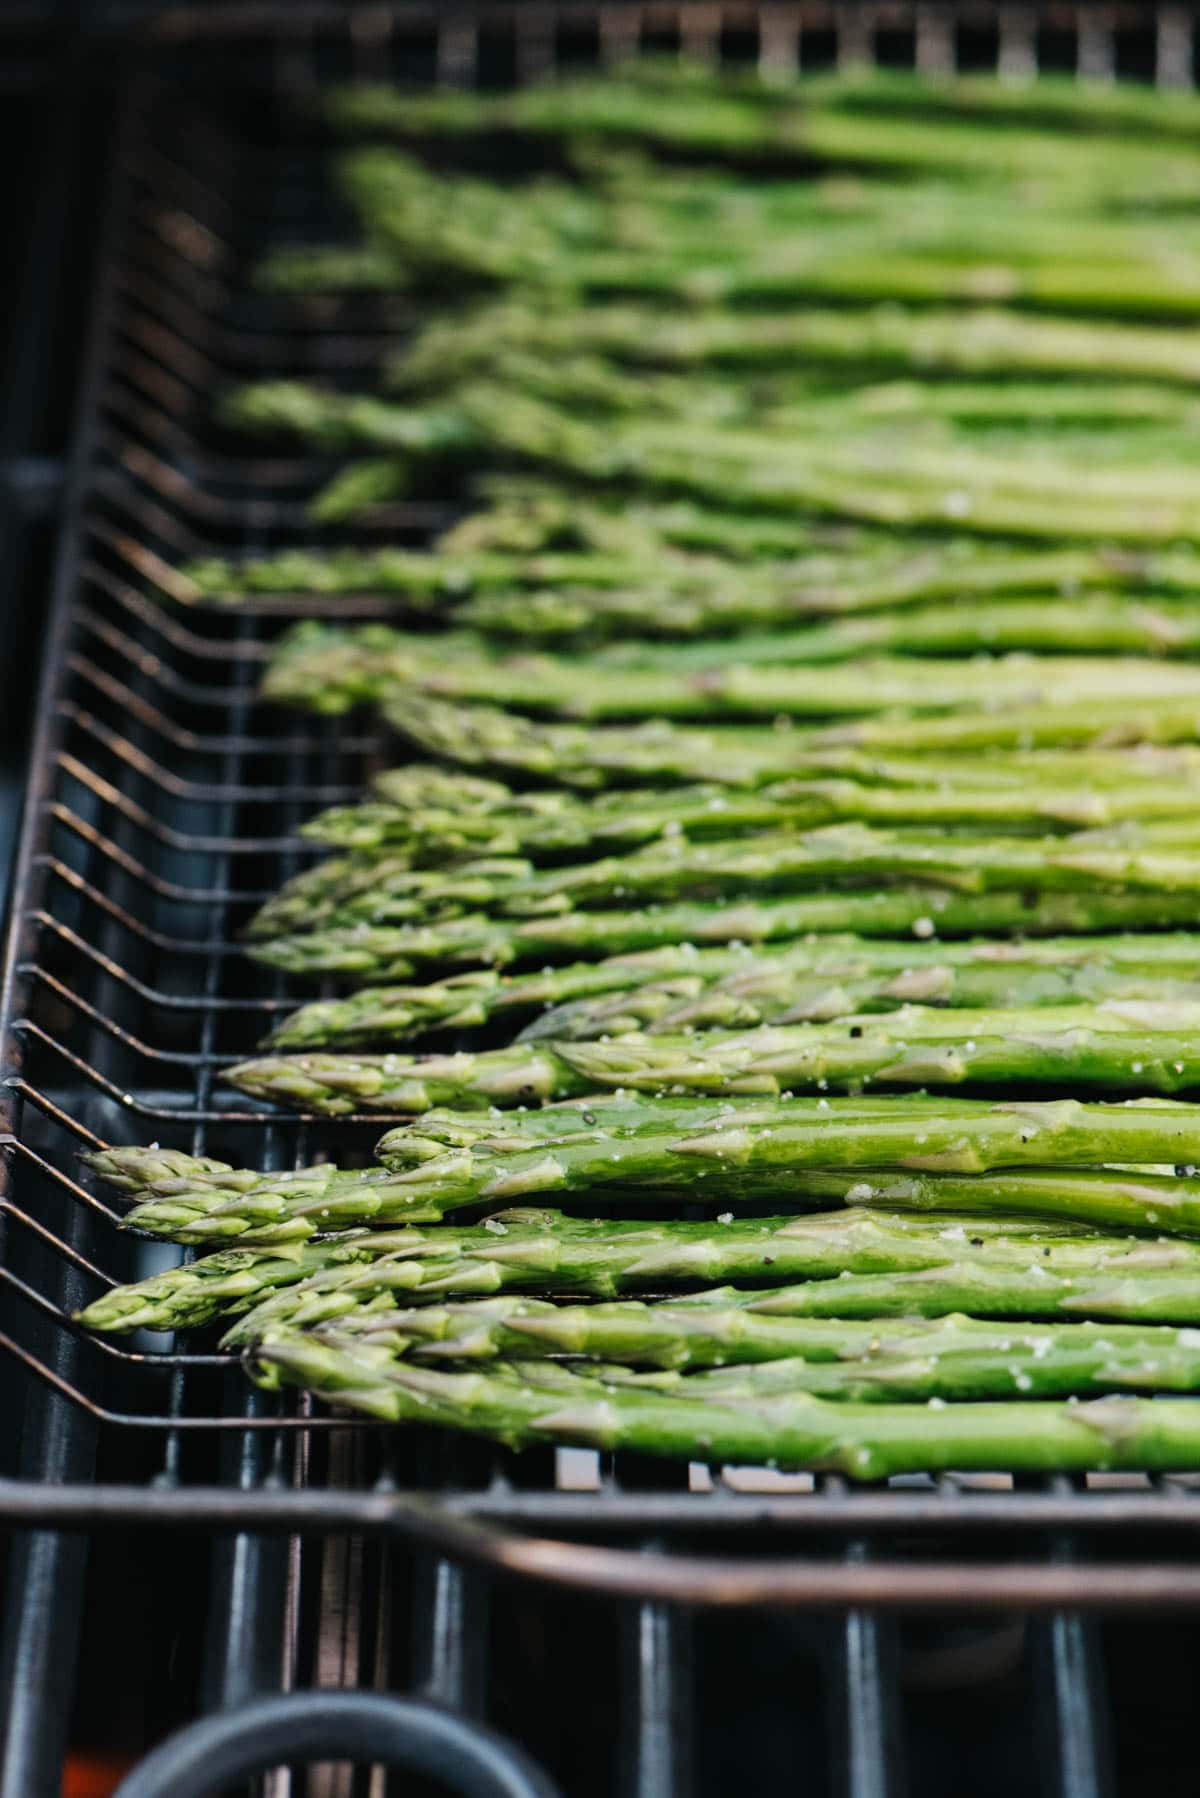 Asparagus spears over a grilling basket on a grill.